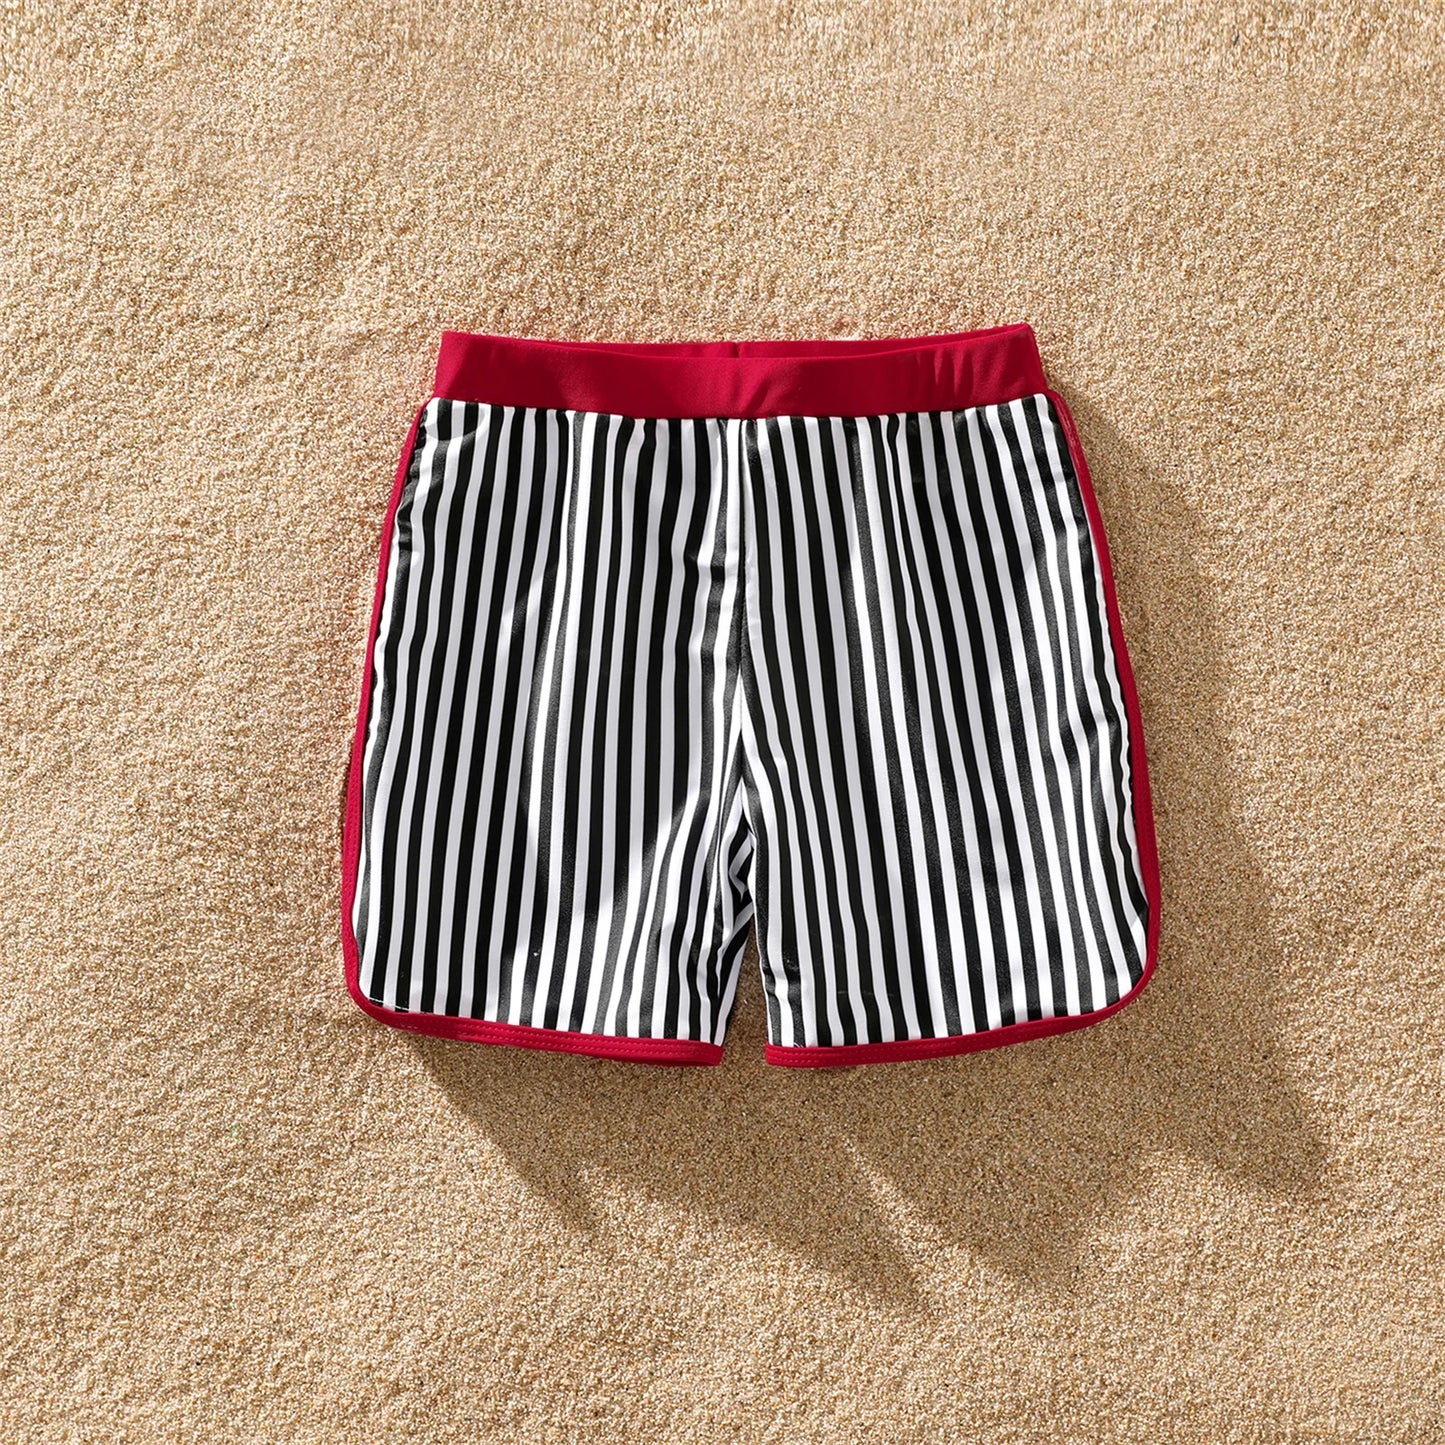 Family Matching! Striped Swim Trunks and Ruffle Splicing One Piece Swimsuit Suitable for Summer Season